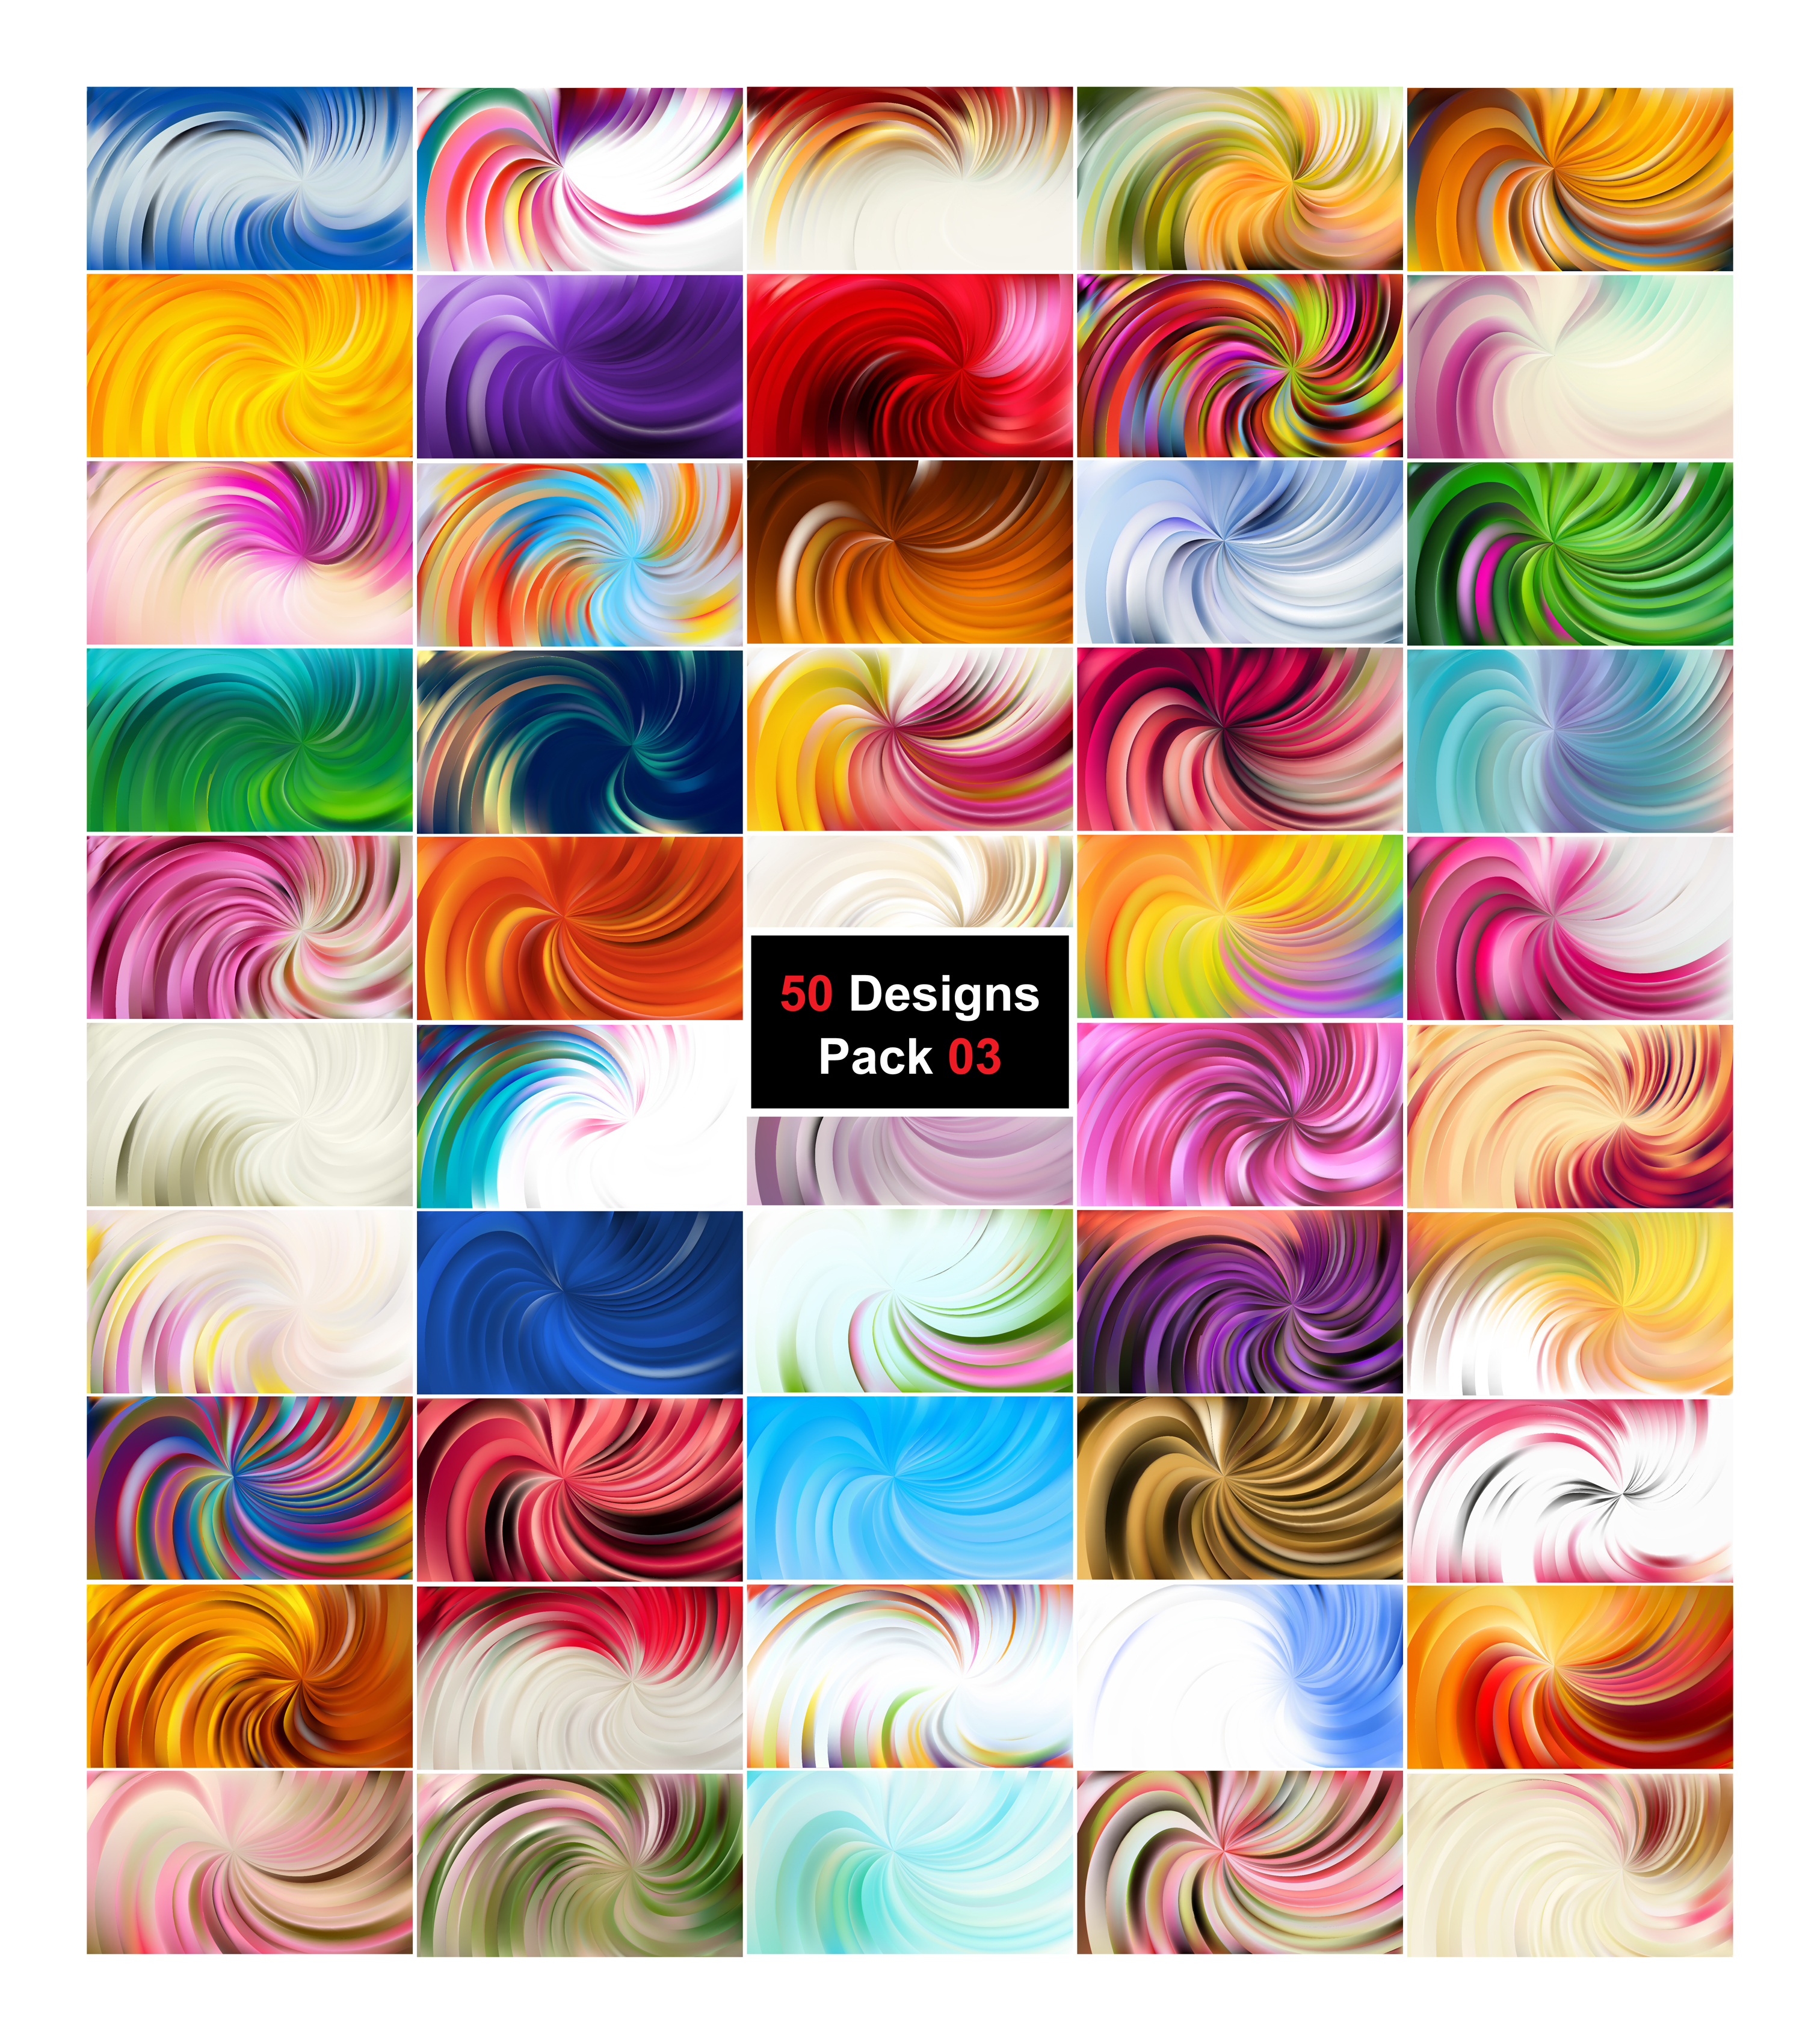 Free 50 Abstract Swirl Background Vector Illustrator Pack 03